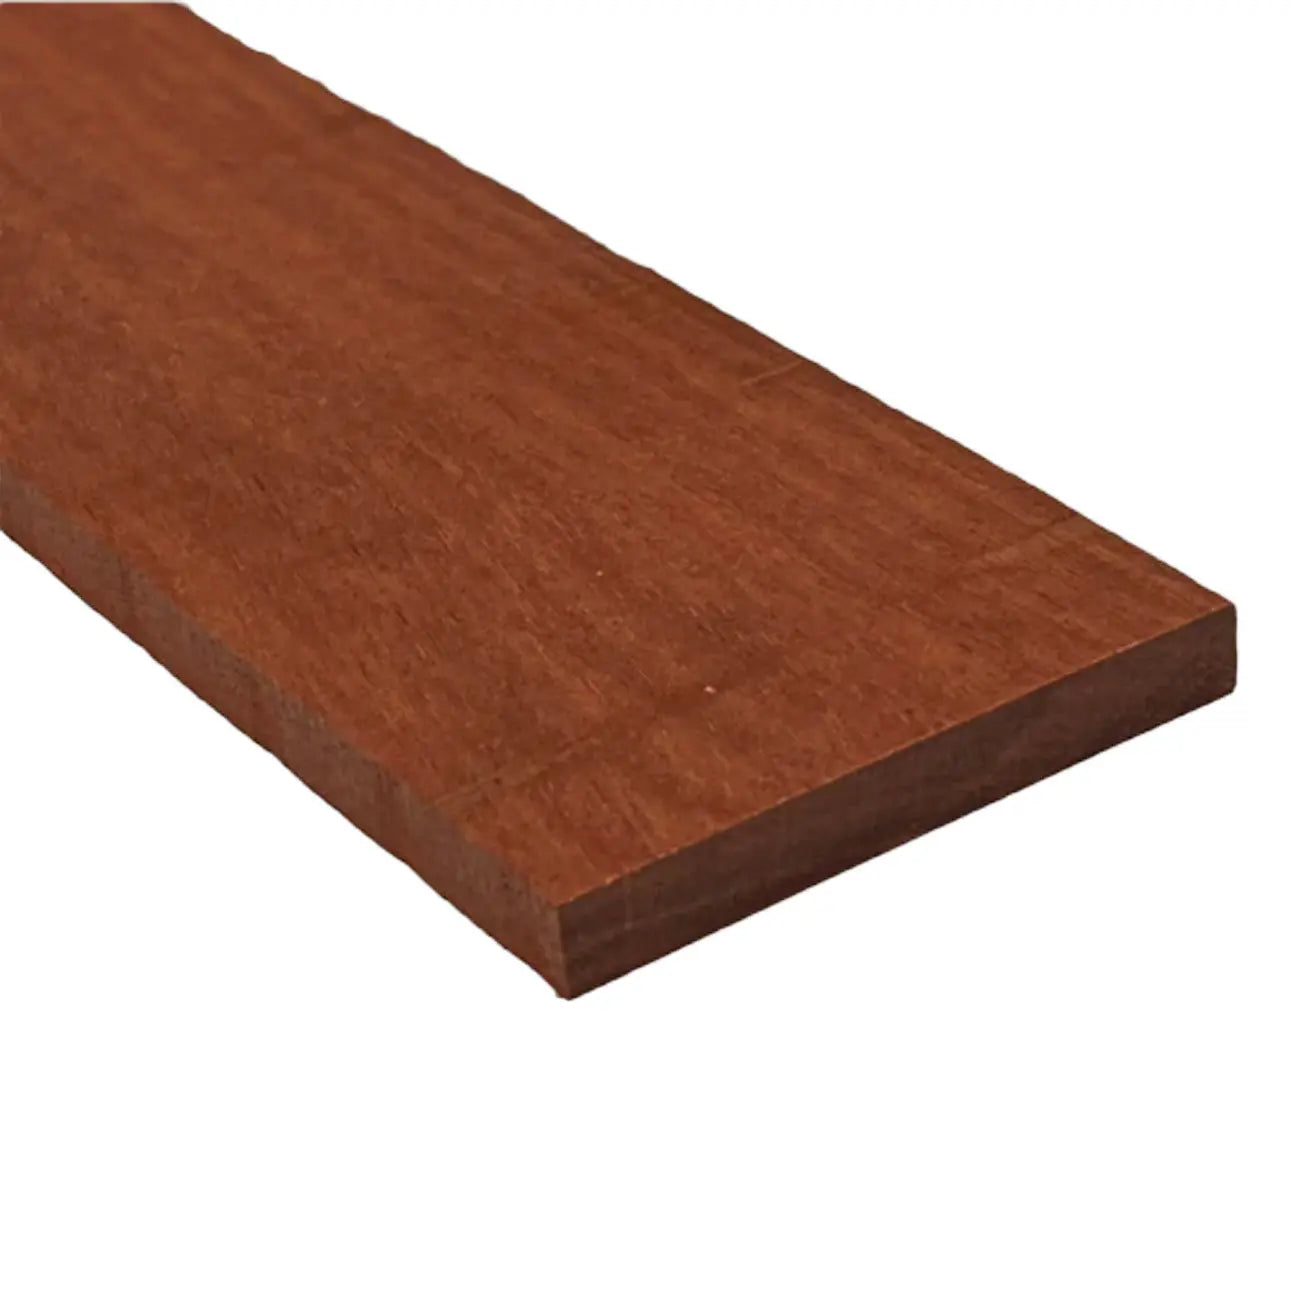 Bloodwood Thin Cutting Board Strips - Woodworkers Source